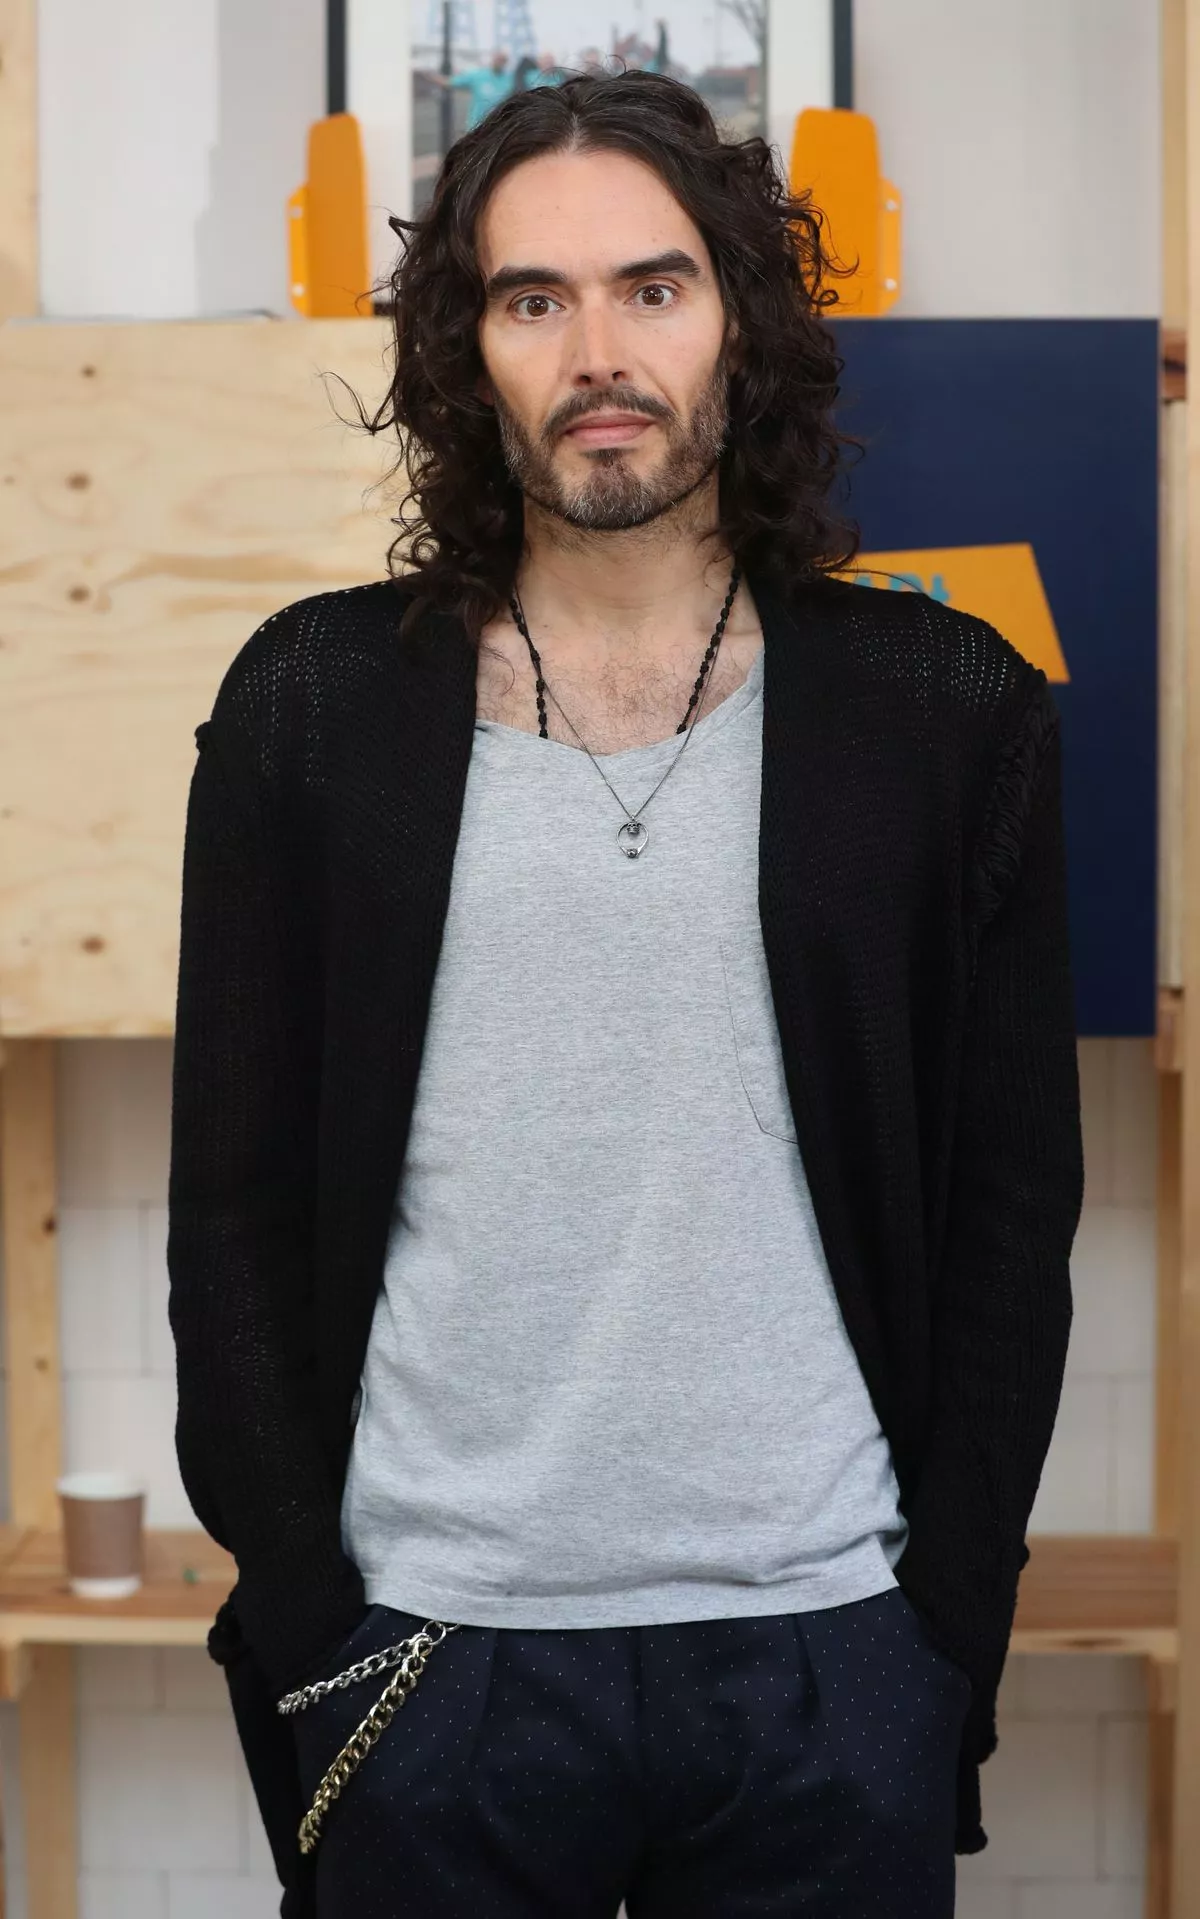 Russell Brand questioned by police over past sexual offense allegations, which he denies (3)